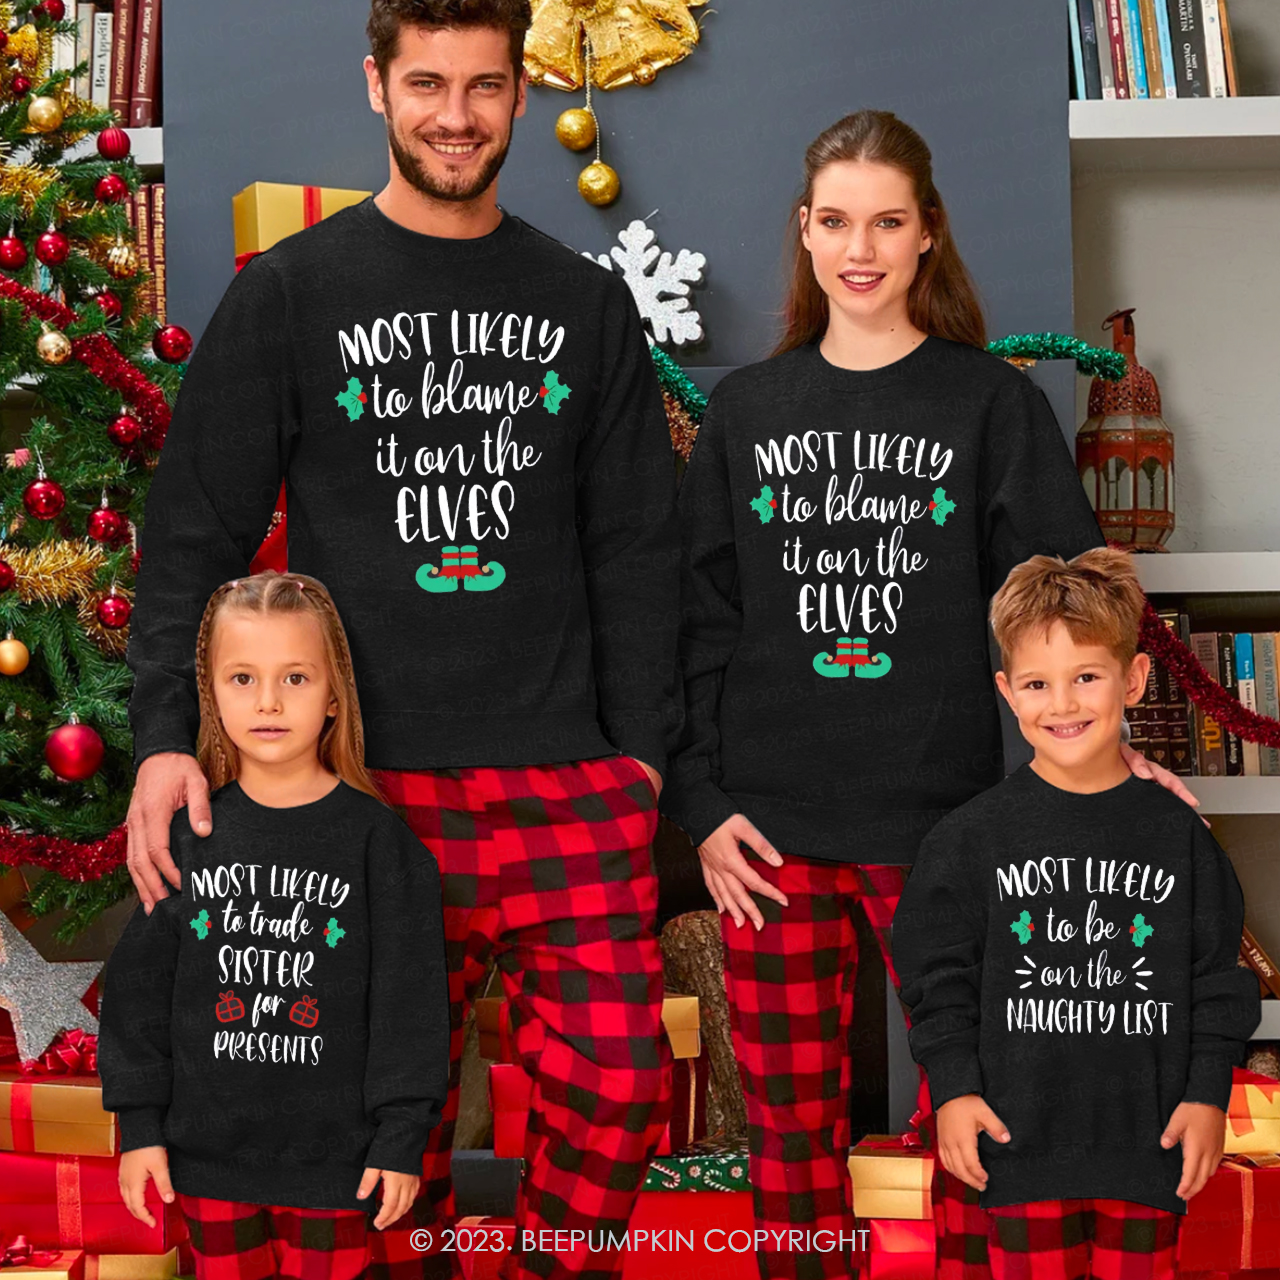 Most Likely to Get Lit Christmas Family Sweatshirts